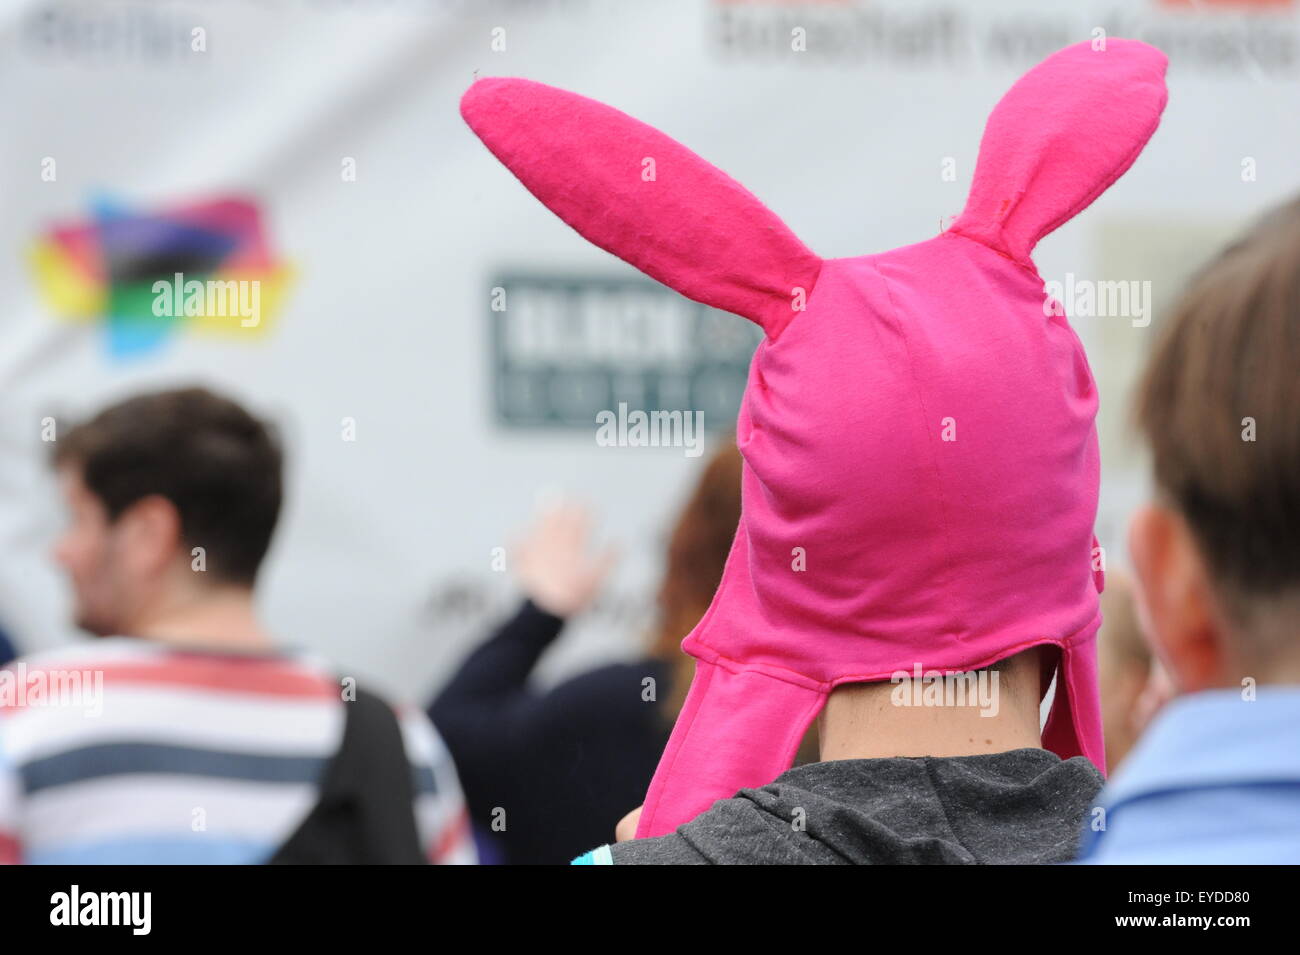 Man with Pink rabbit ears Stock Photo